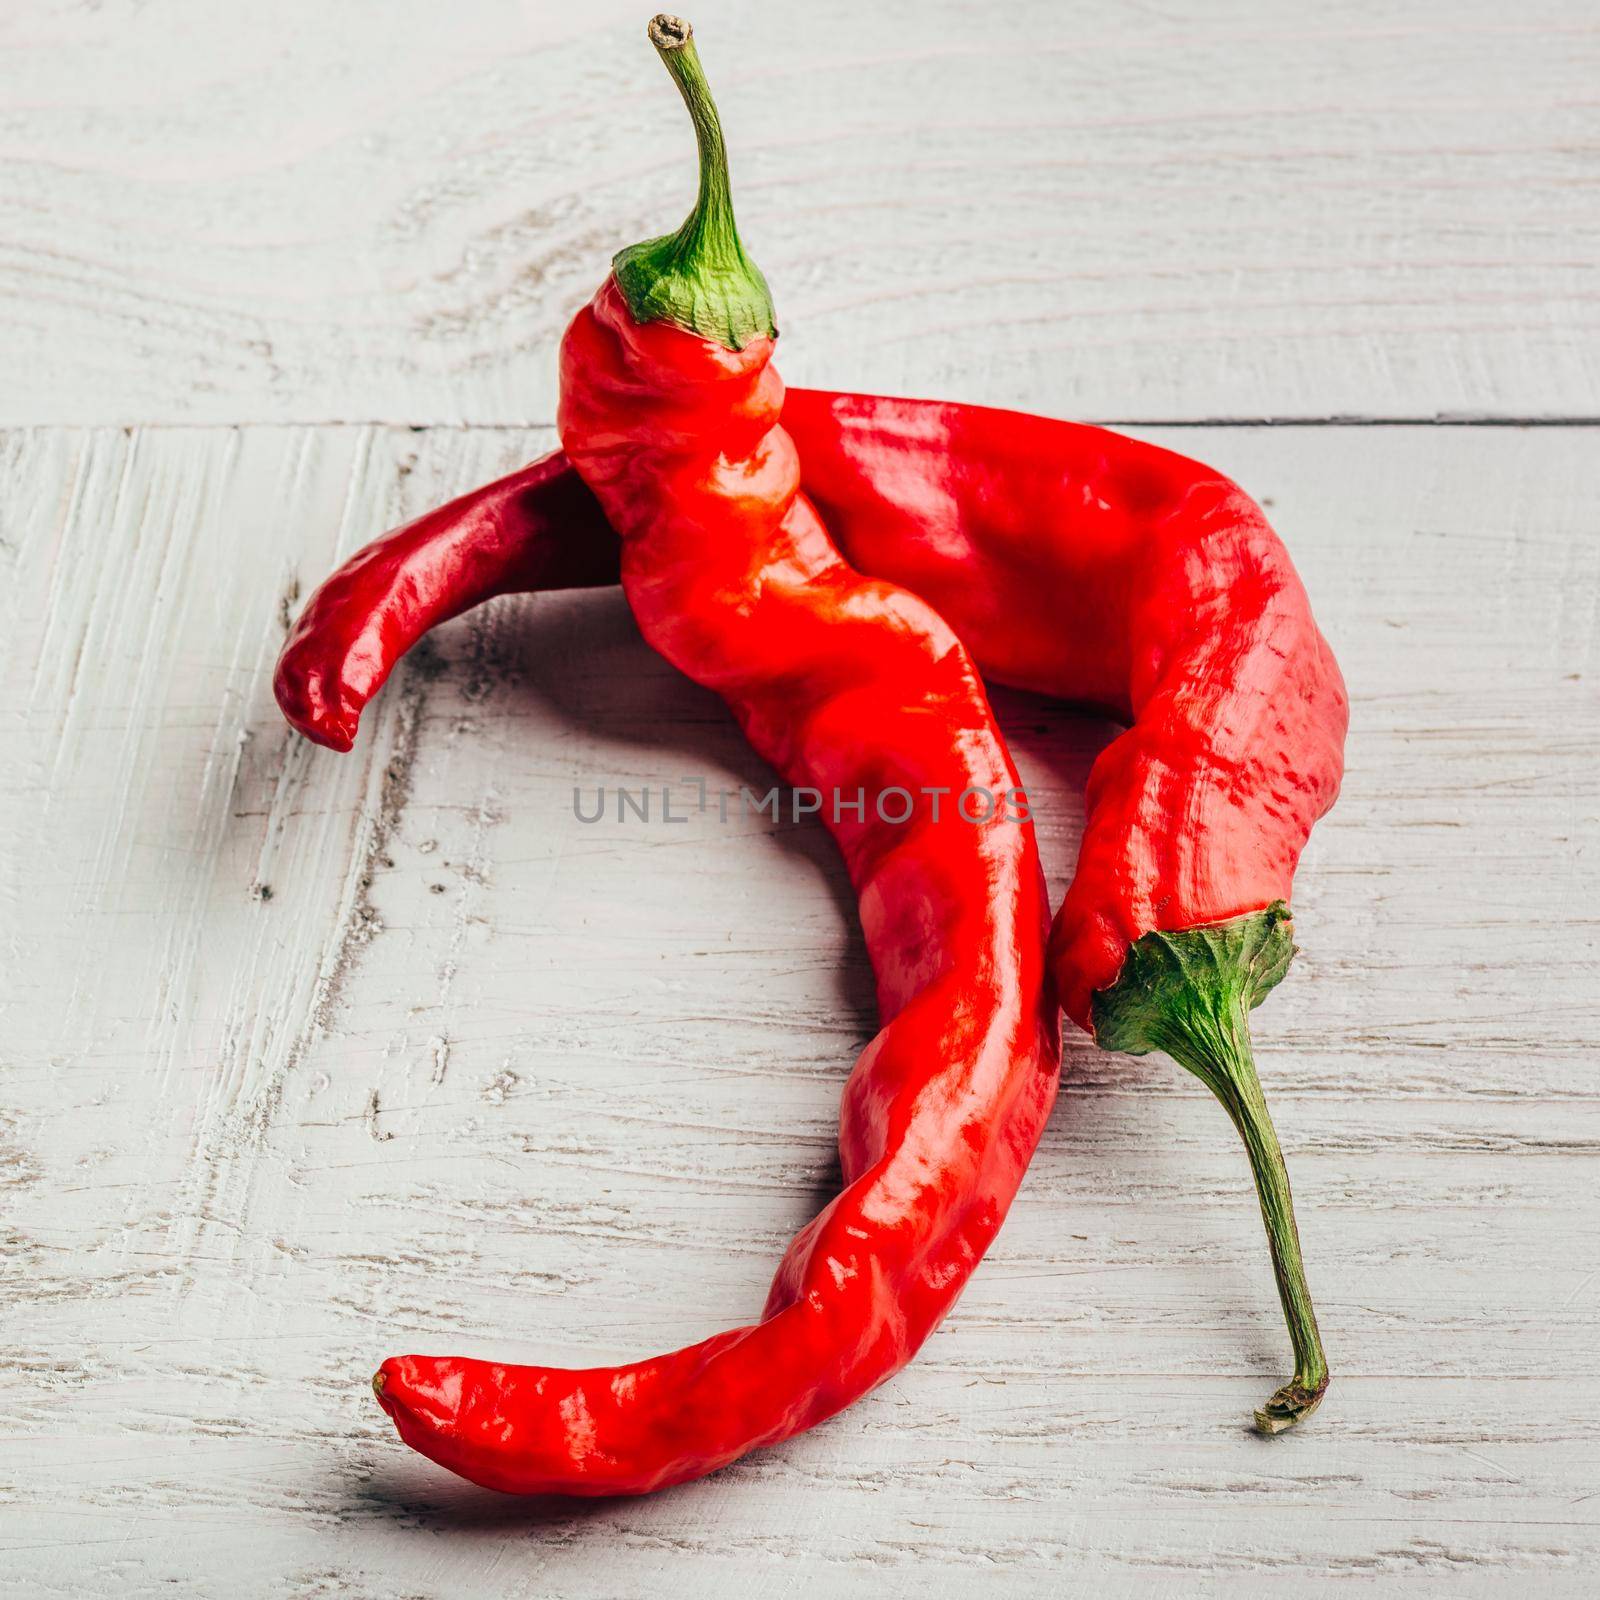 Red chili peppers on wooden background. by Seva_blsv